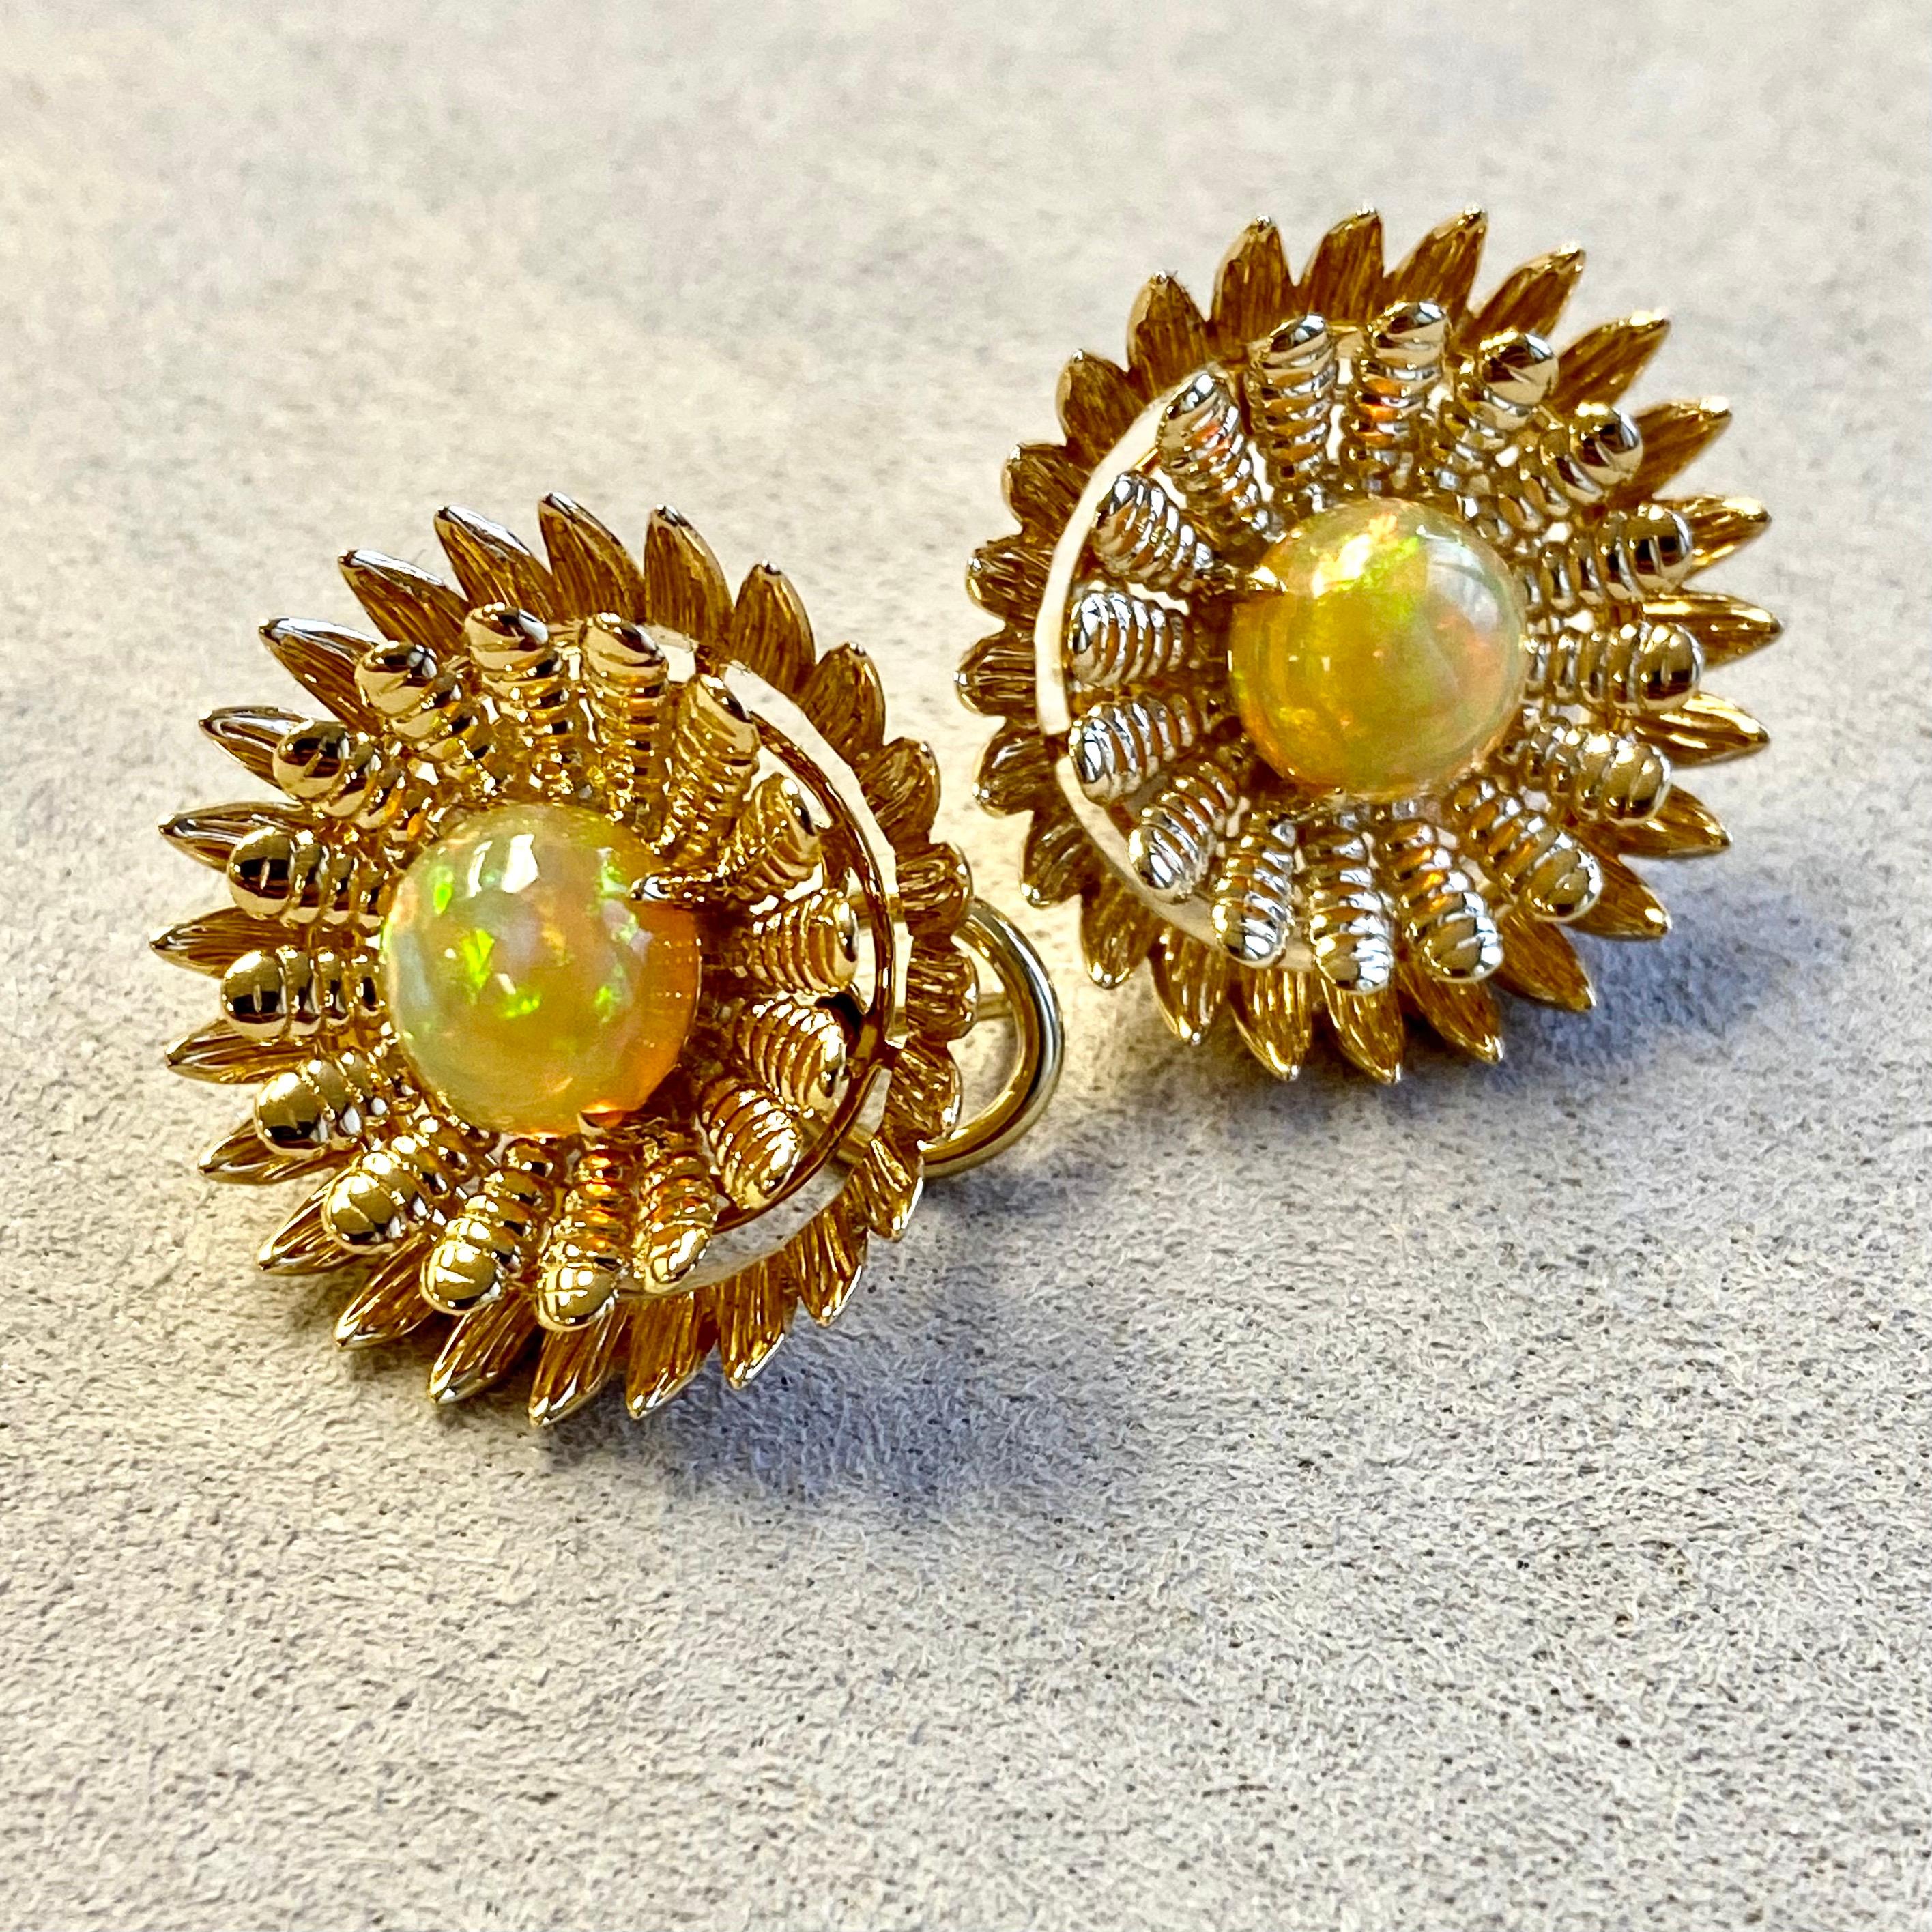 Created in 18 karat yellow gold
Ethiopian Opals 3 carats approx.
Omega Clip-back
Limited edition

These exotic earrings, crafted from lustrous 18 karat yellow gold, feature two precious gemstones: a stunning Candy Blue Topaz and an array of